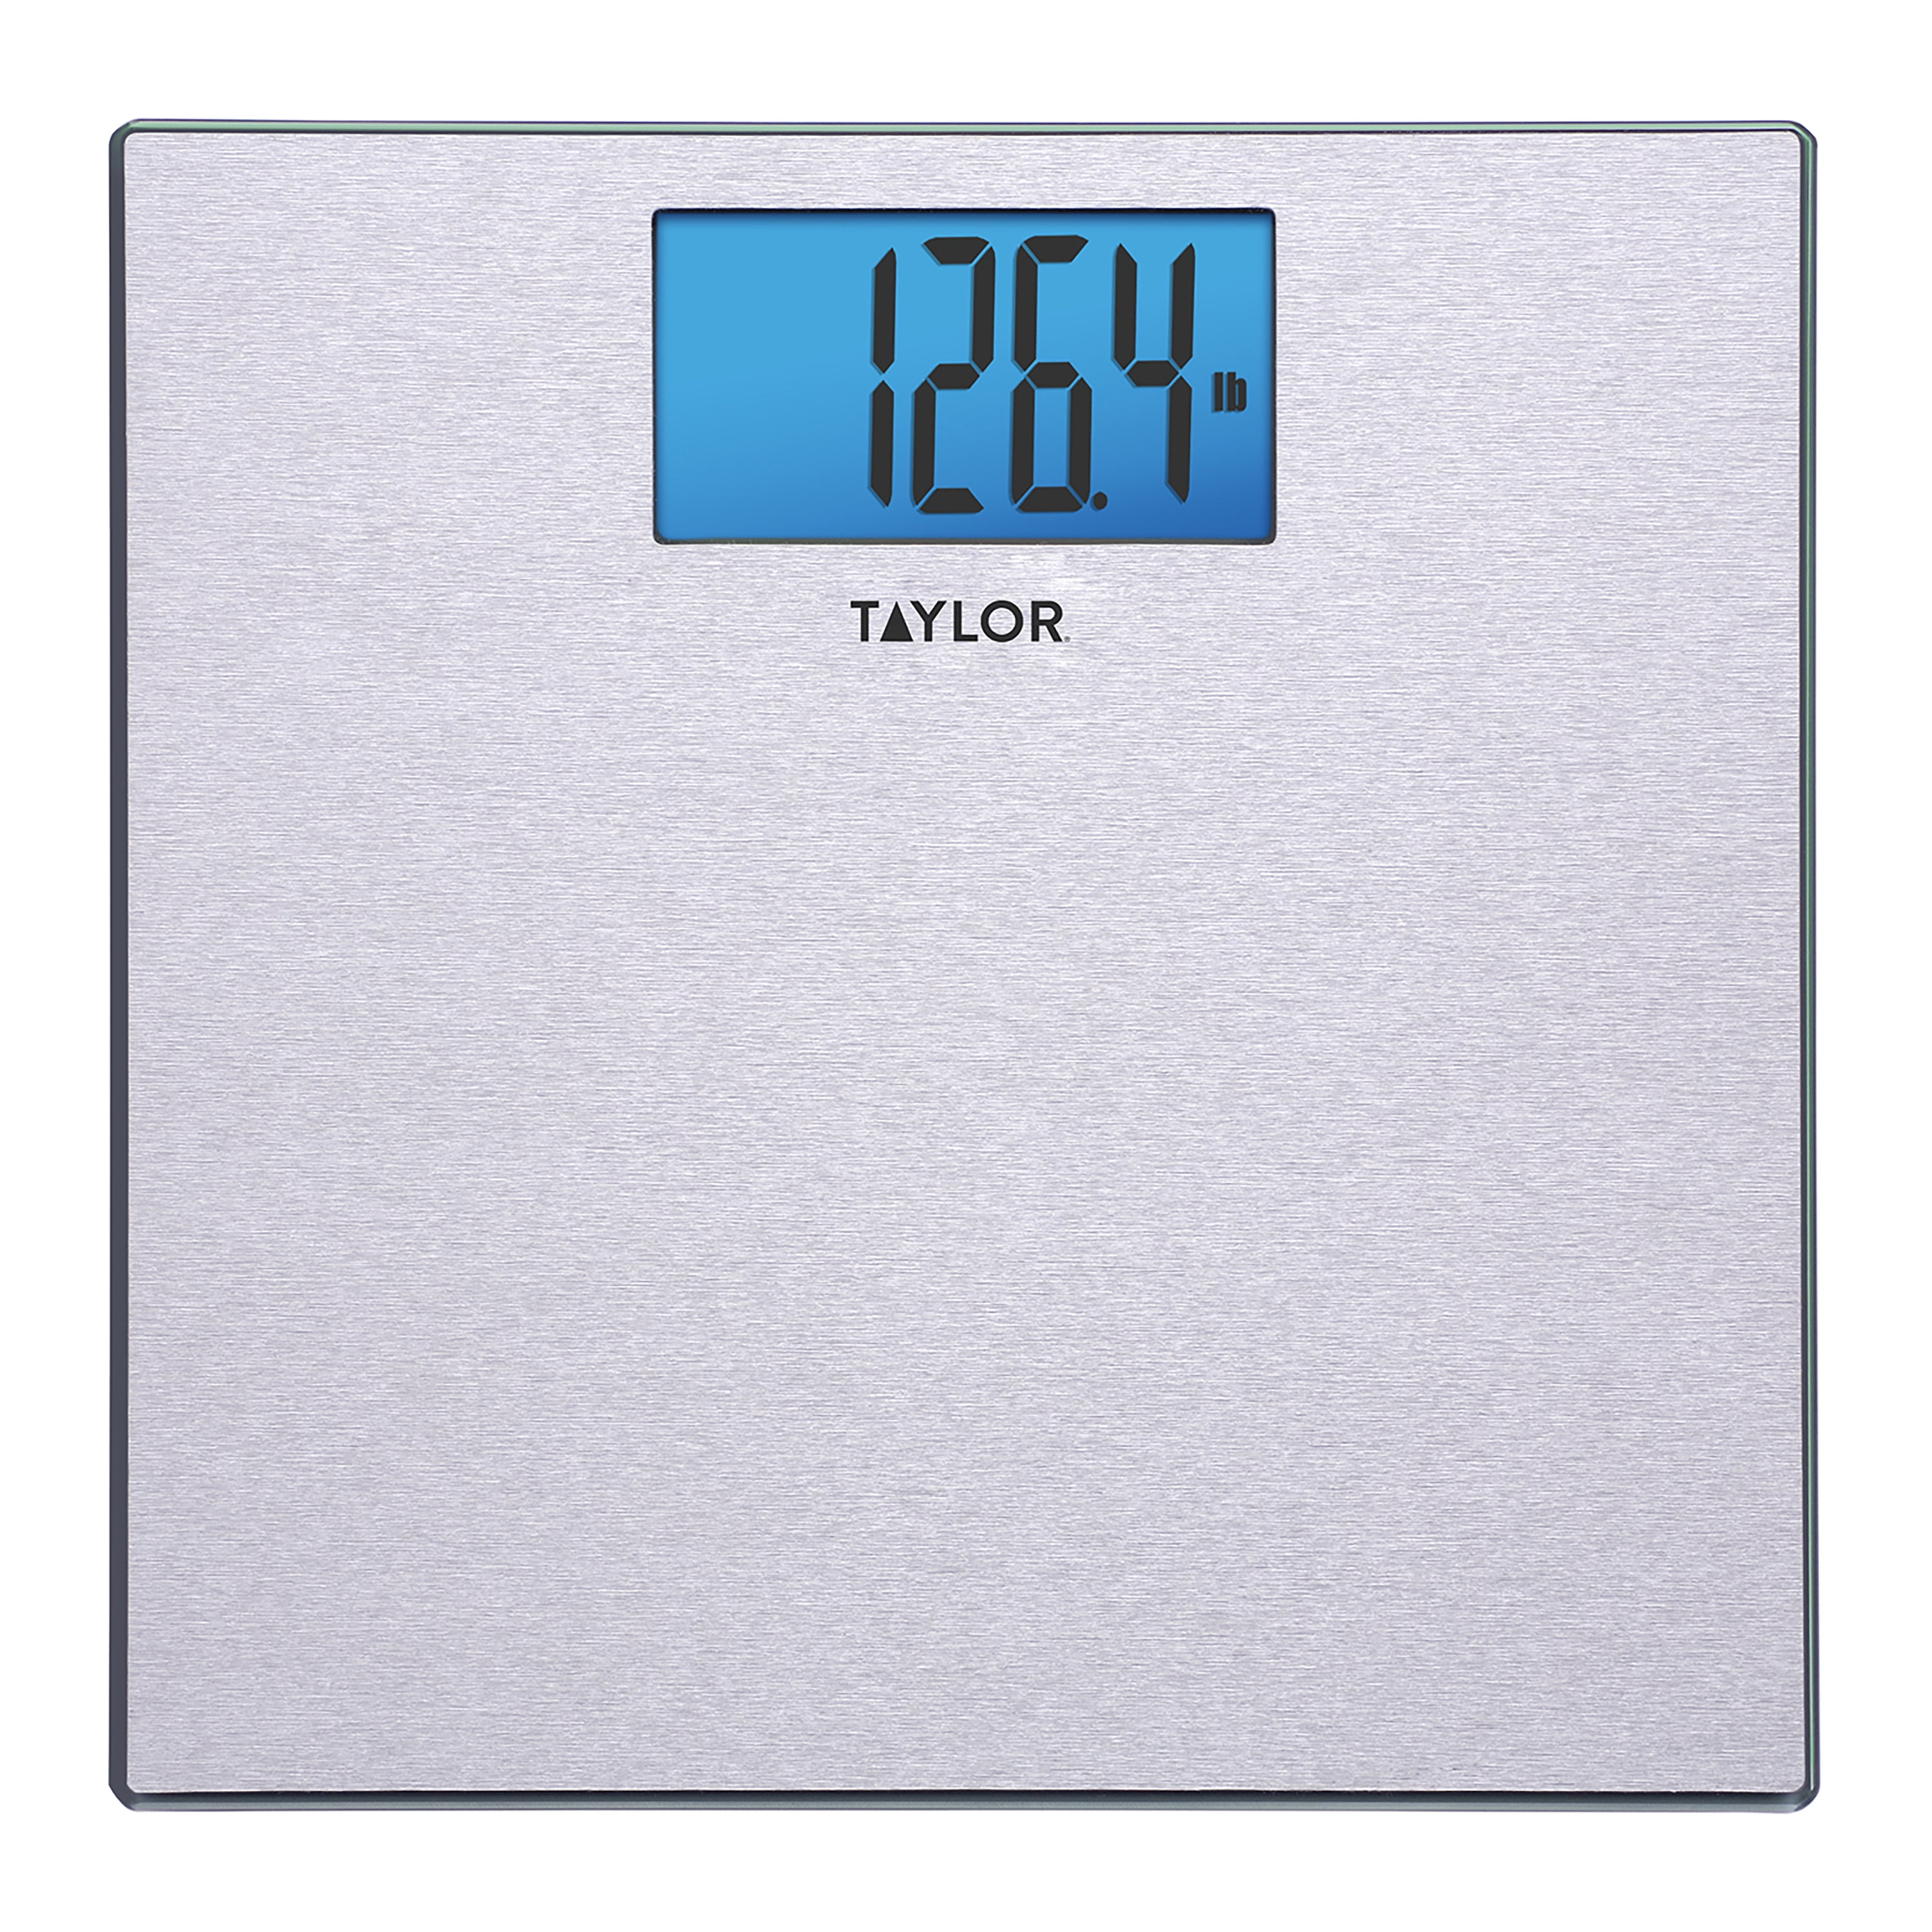 Body Weighing Scale Etekcity Stainless Steel Platform 400 Lbs Capacity Auto Off 